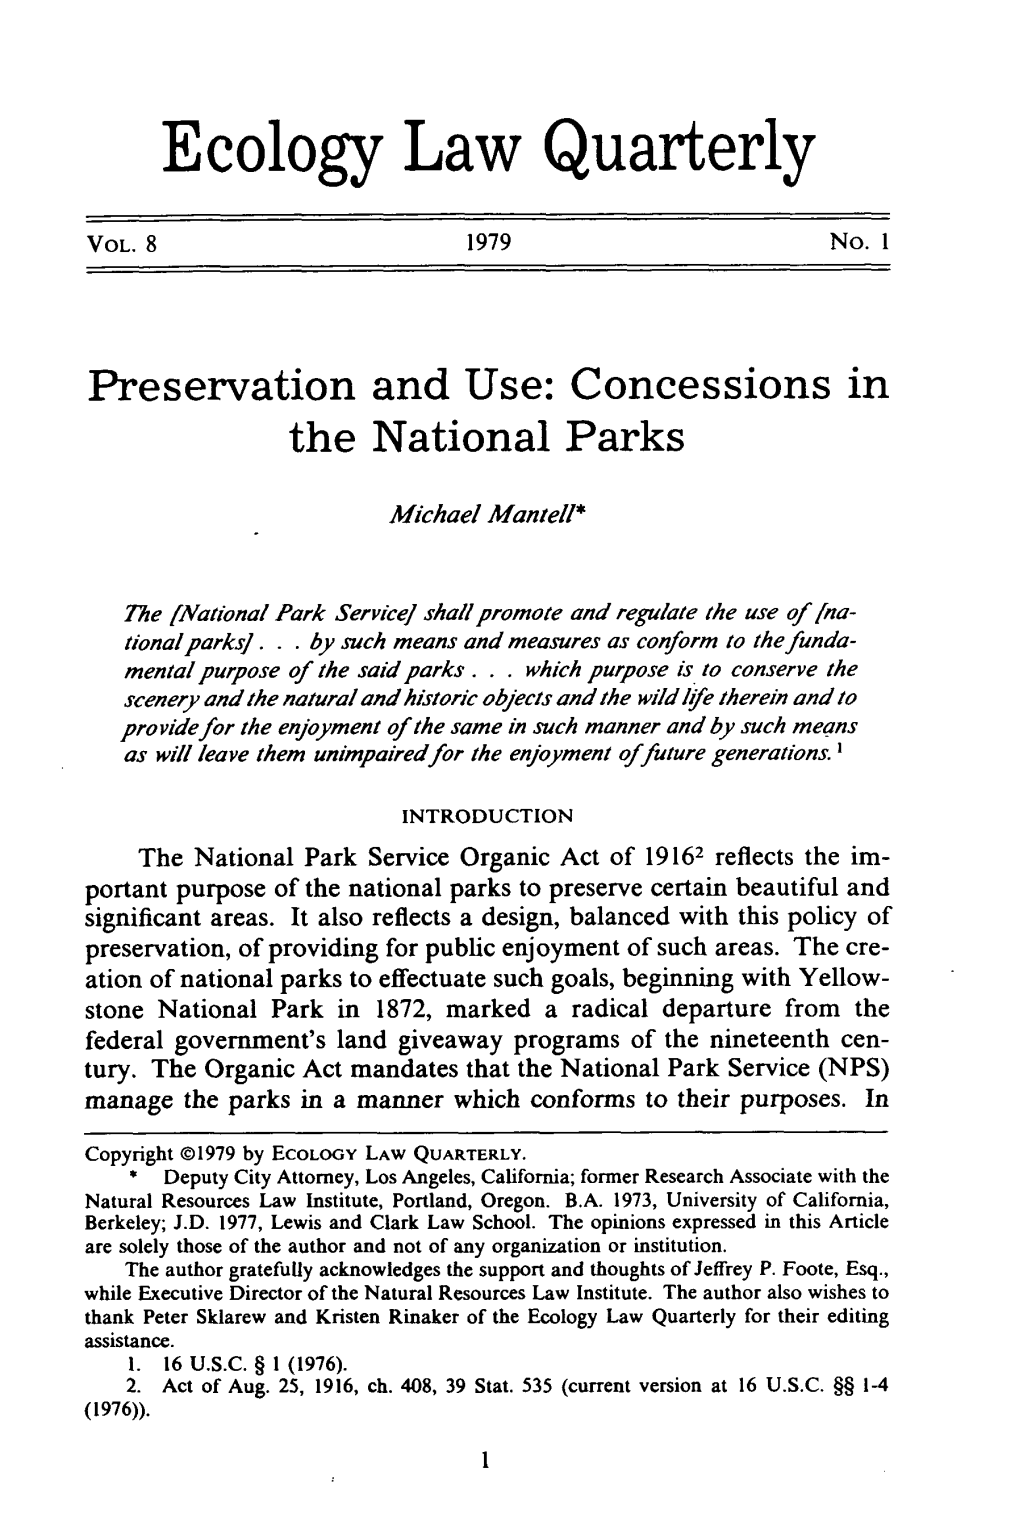 Preservations and Use: Concessions in the National Parks